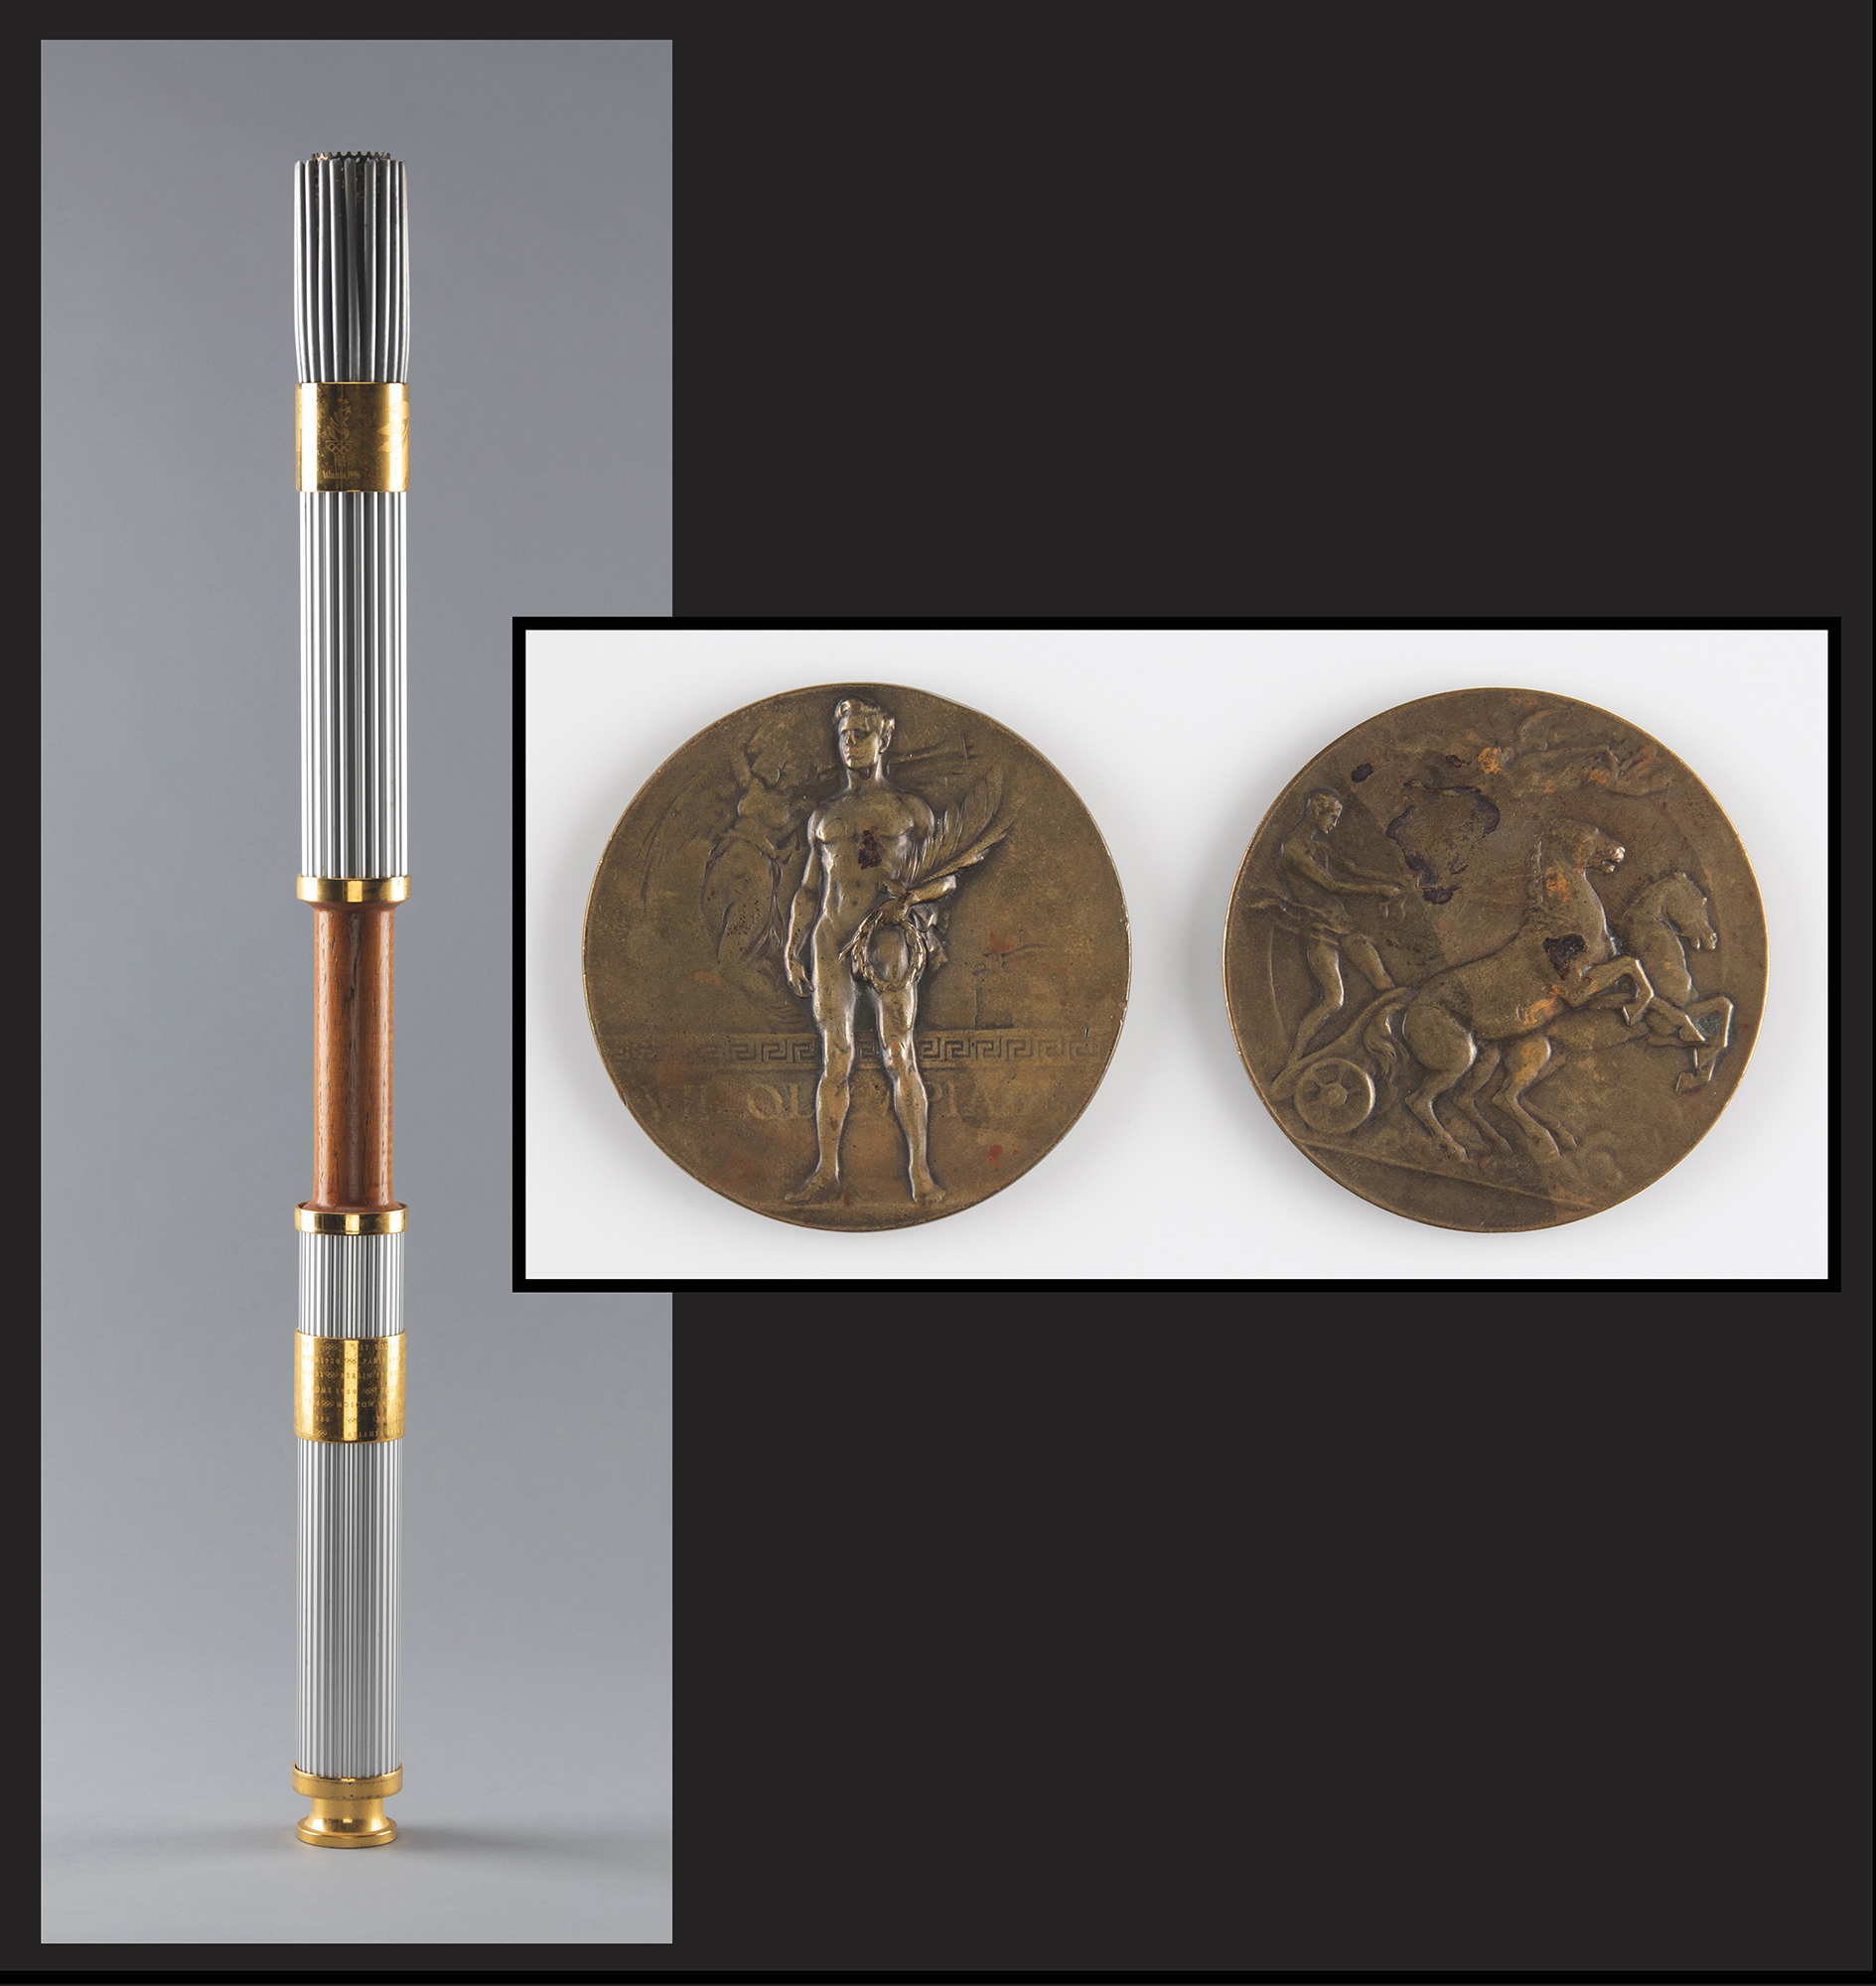 Lot #4050 Hal Haig Prieste's Antwerp 1920 Summer Olympics Bronze Winner's Medal and Participation Medal, and Atlanta 1996 Summer Olympics Torch - Image 1